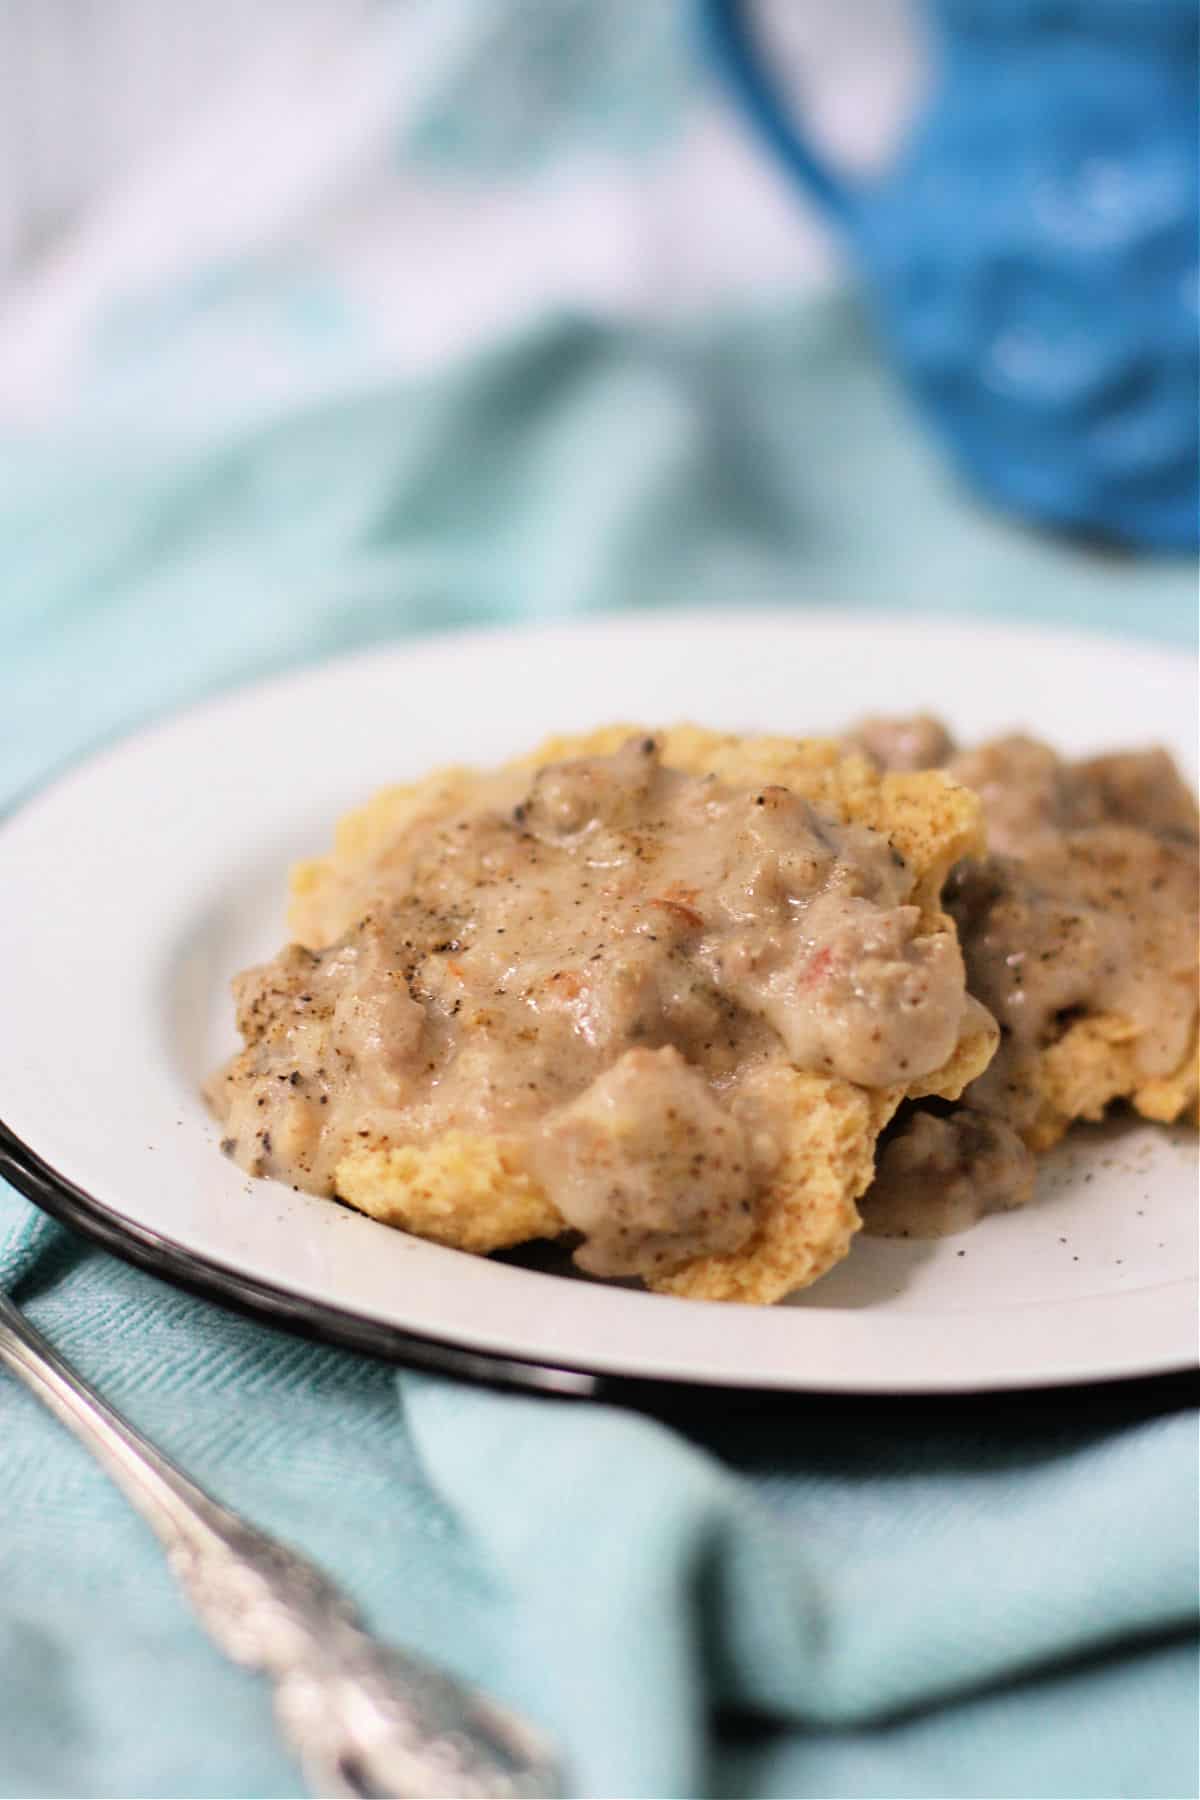 dairy free sausage gravy and biscuits on a plate